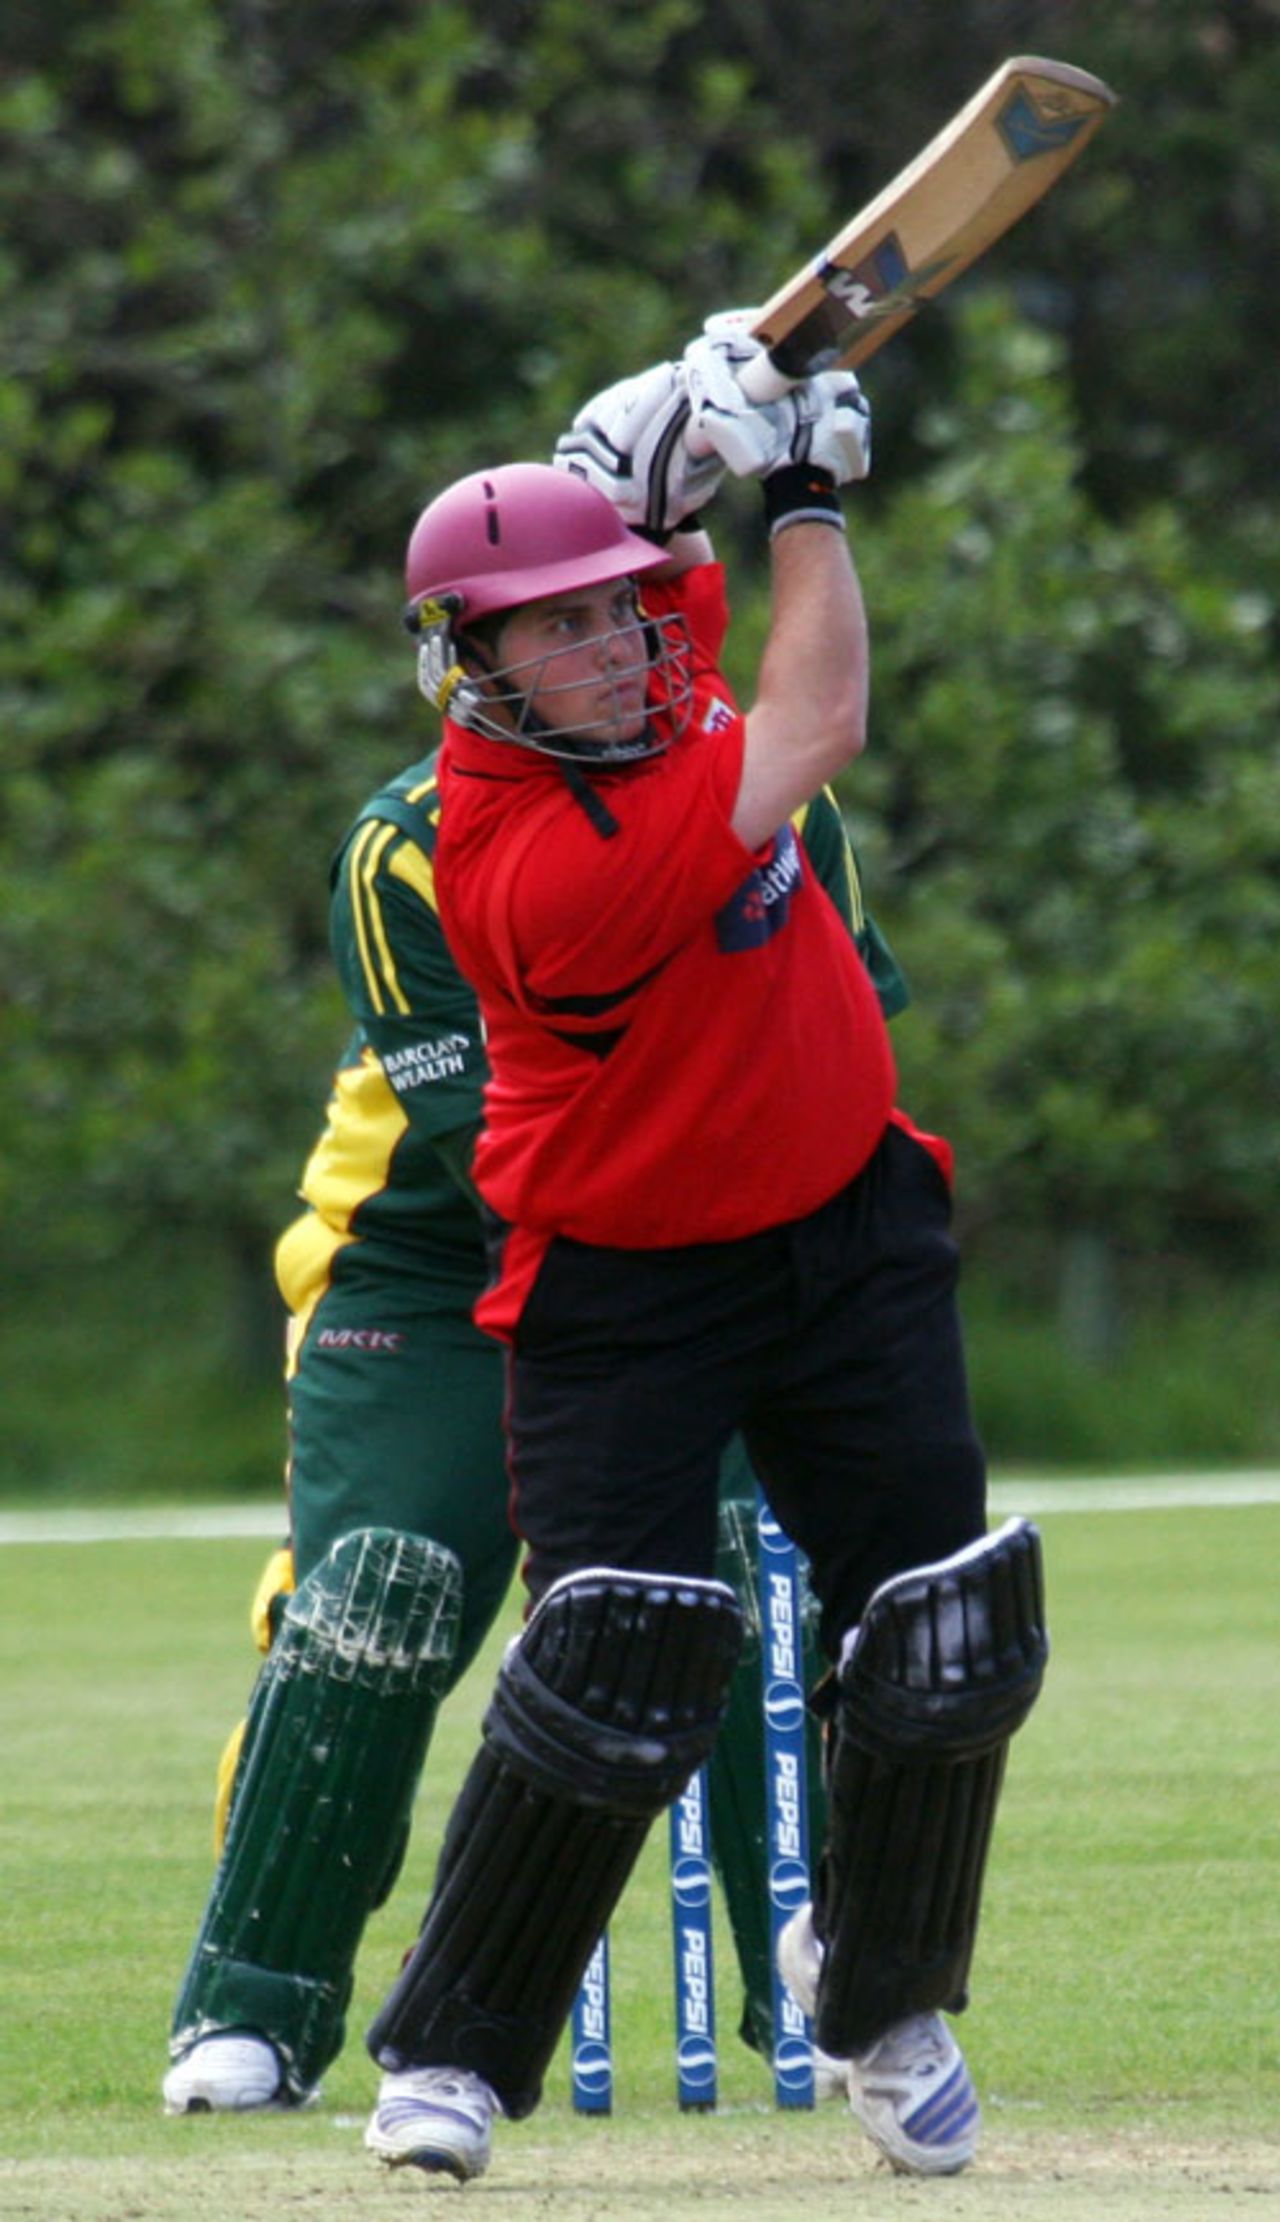 Kieron Ferrary on the attack on his way to 90, Gibraltar v Guernsey, ICC World Cricket League Division 7, Guernsey, May 18, 2009